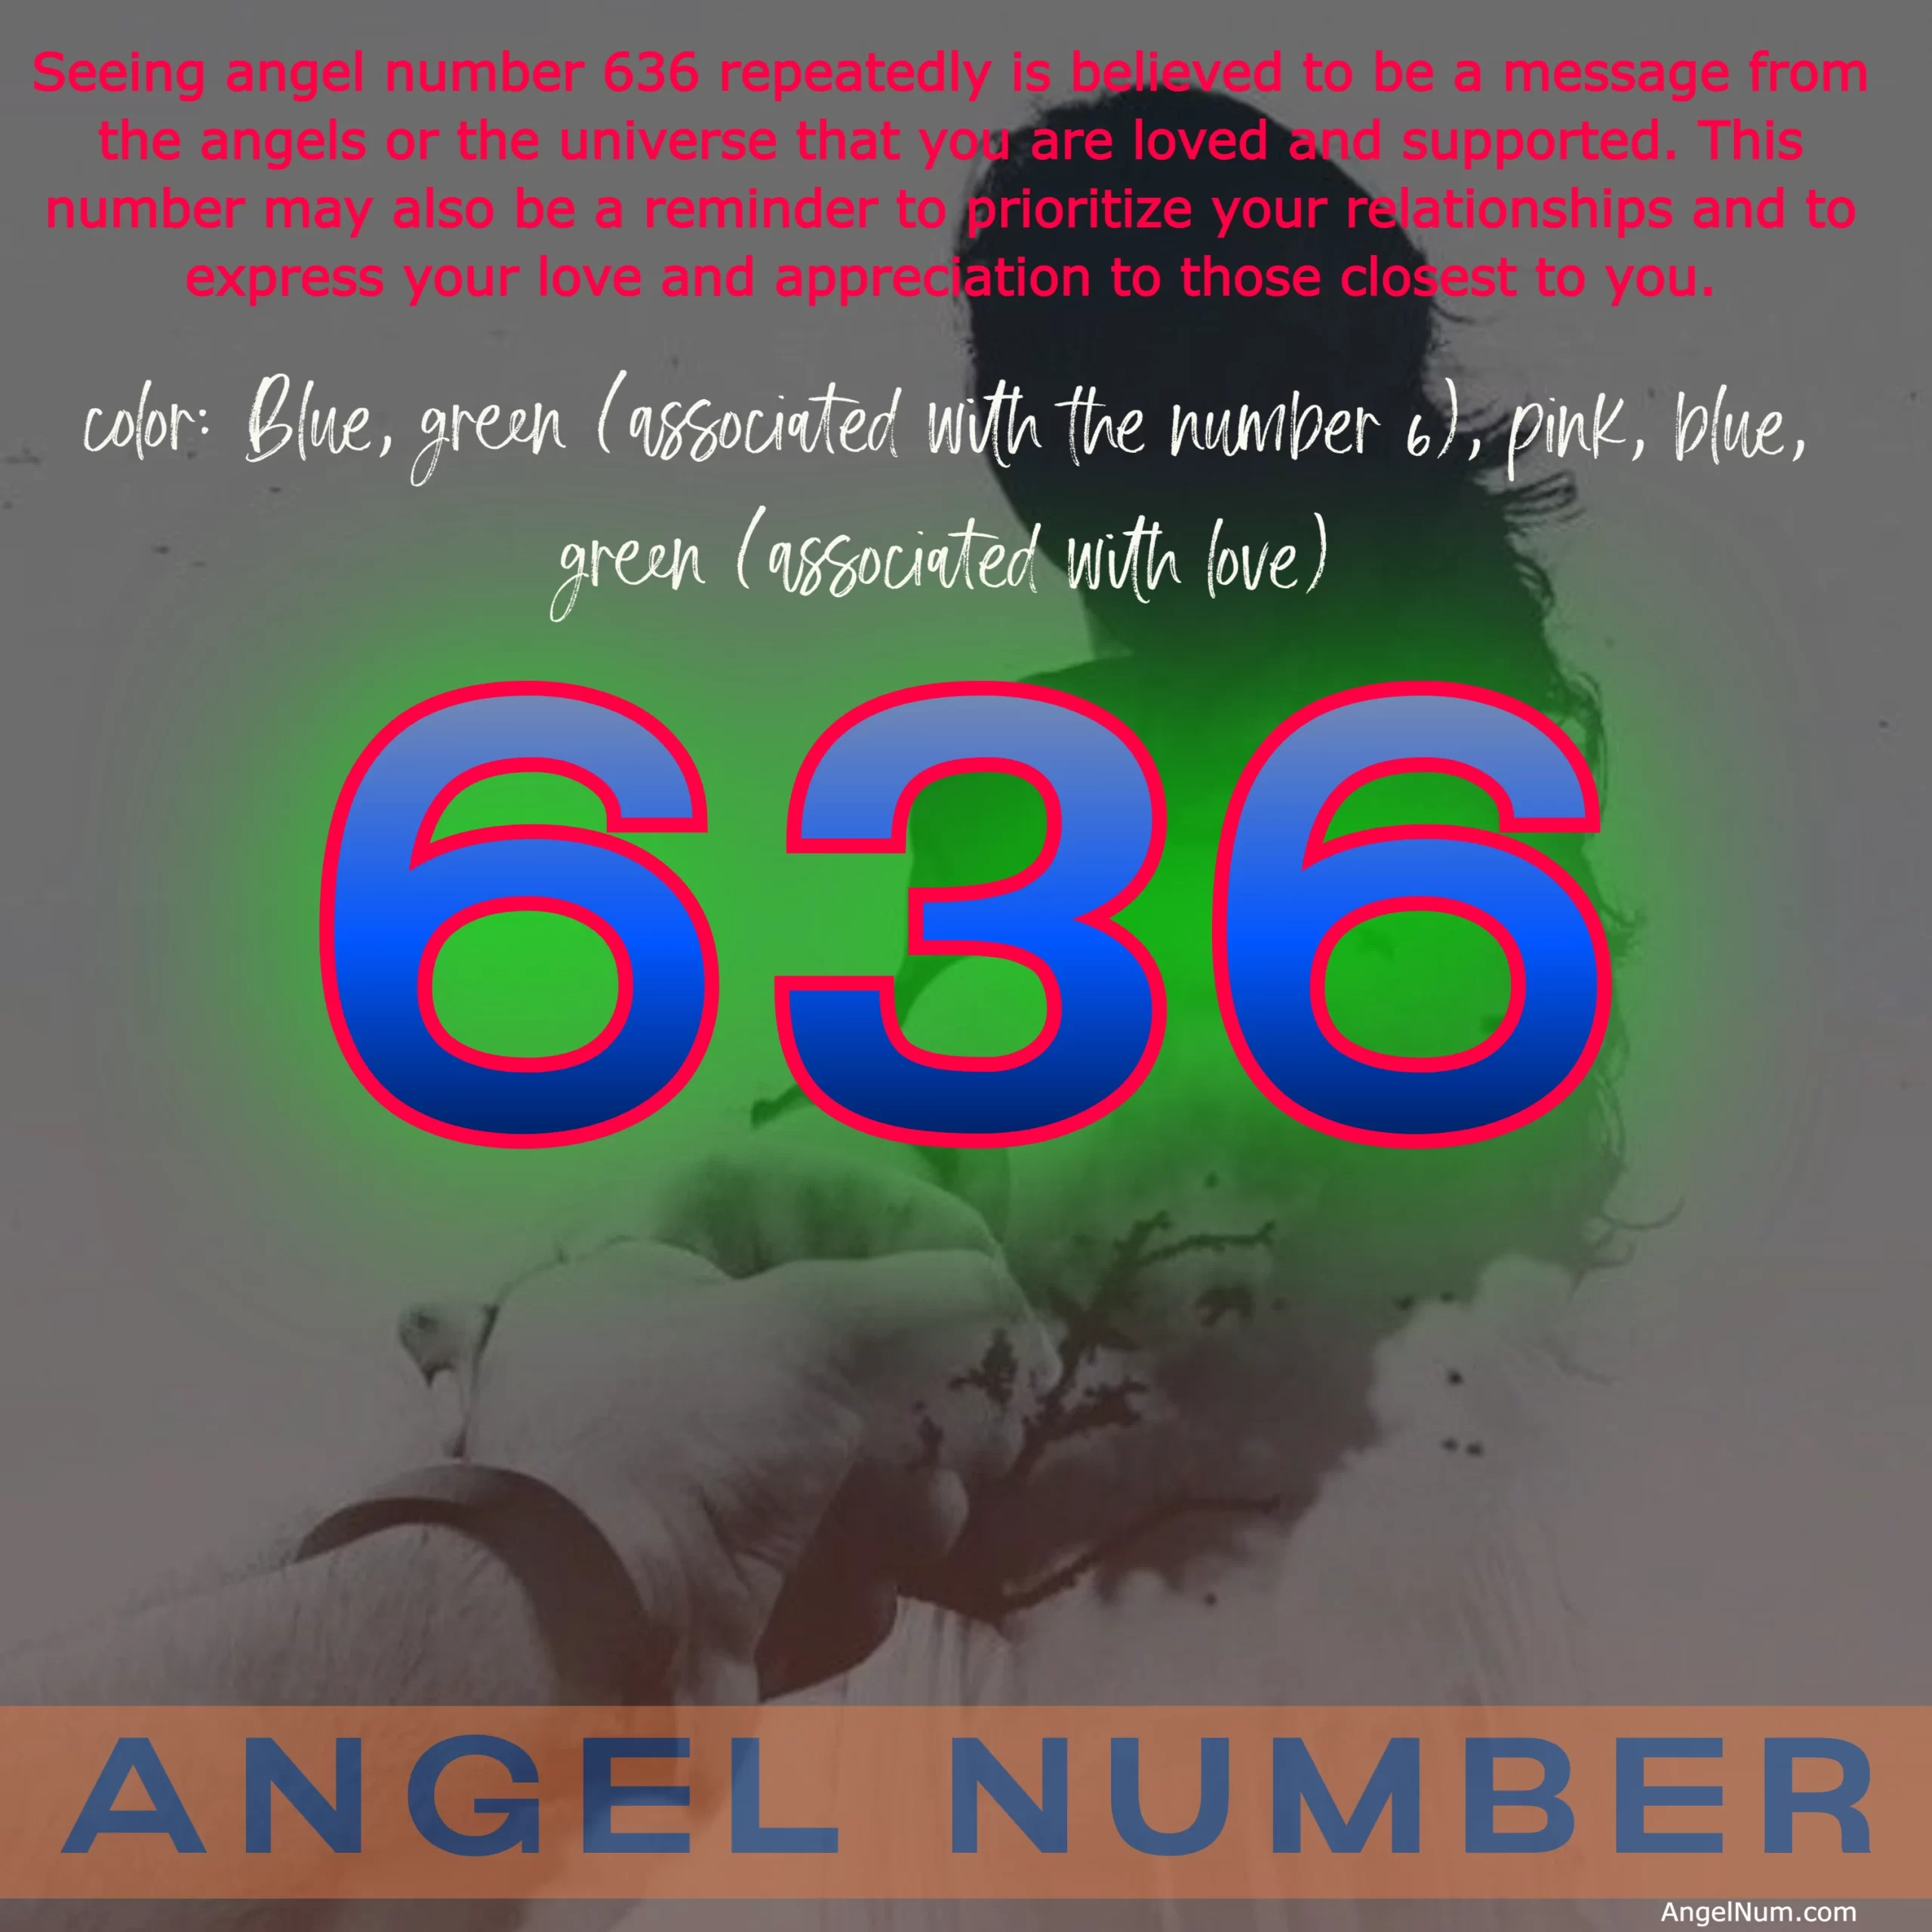 Angel Number 636: What Does it Mean and How to Interpret its Message?